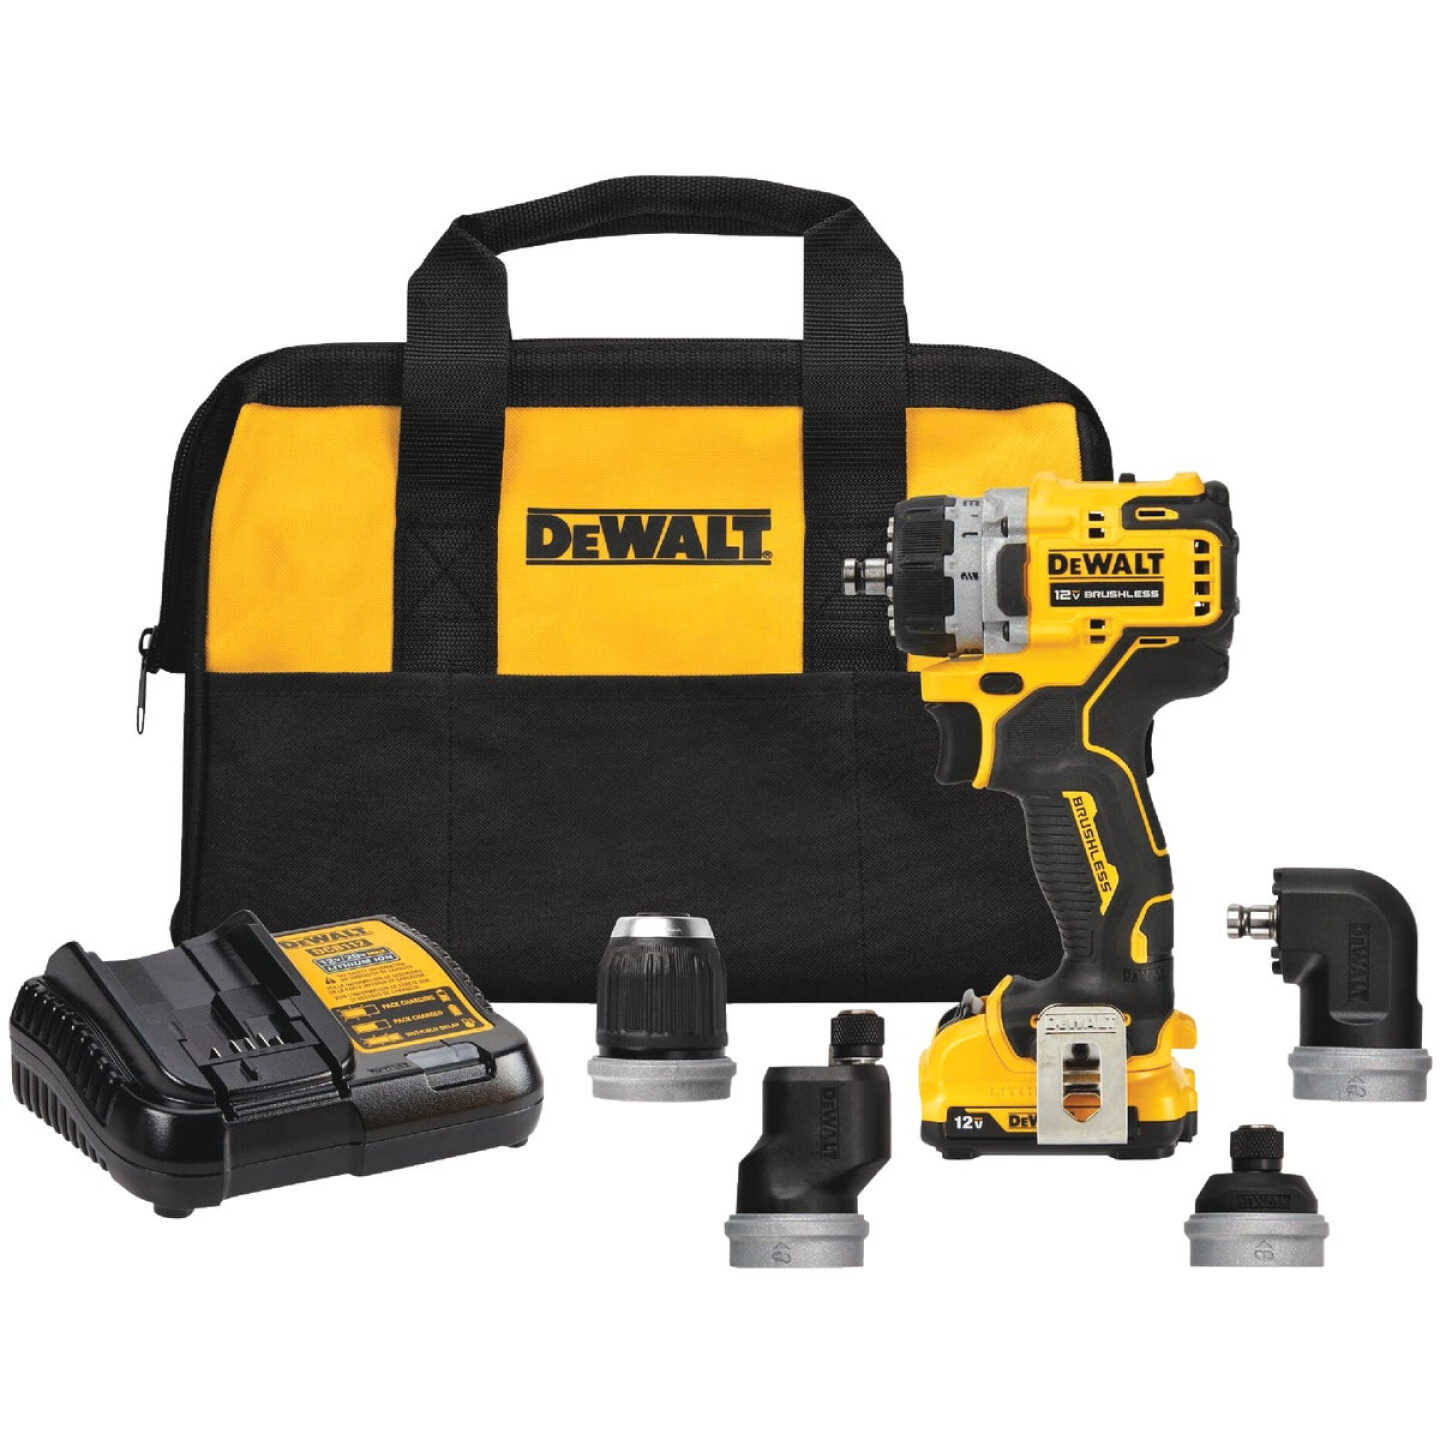 DEWALT XTREME 12V MAX Brushless 3/8 In. 5-In-1 Cordless Drill